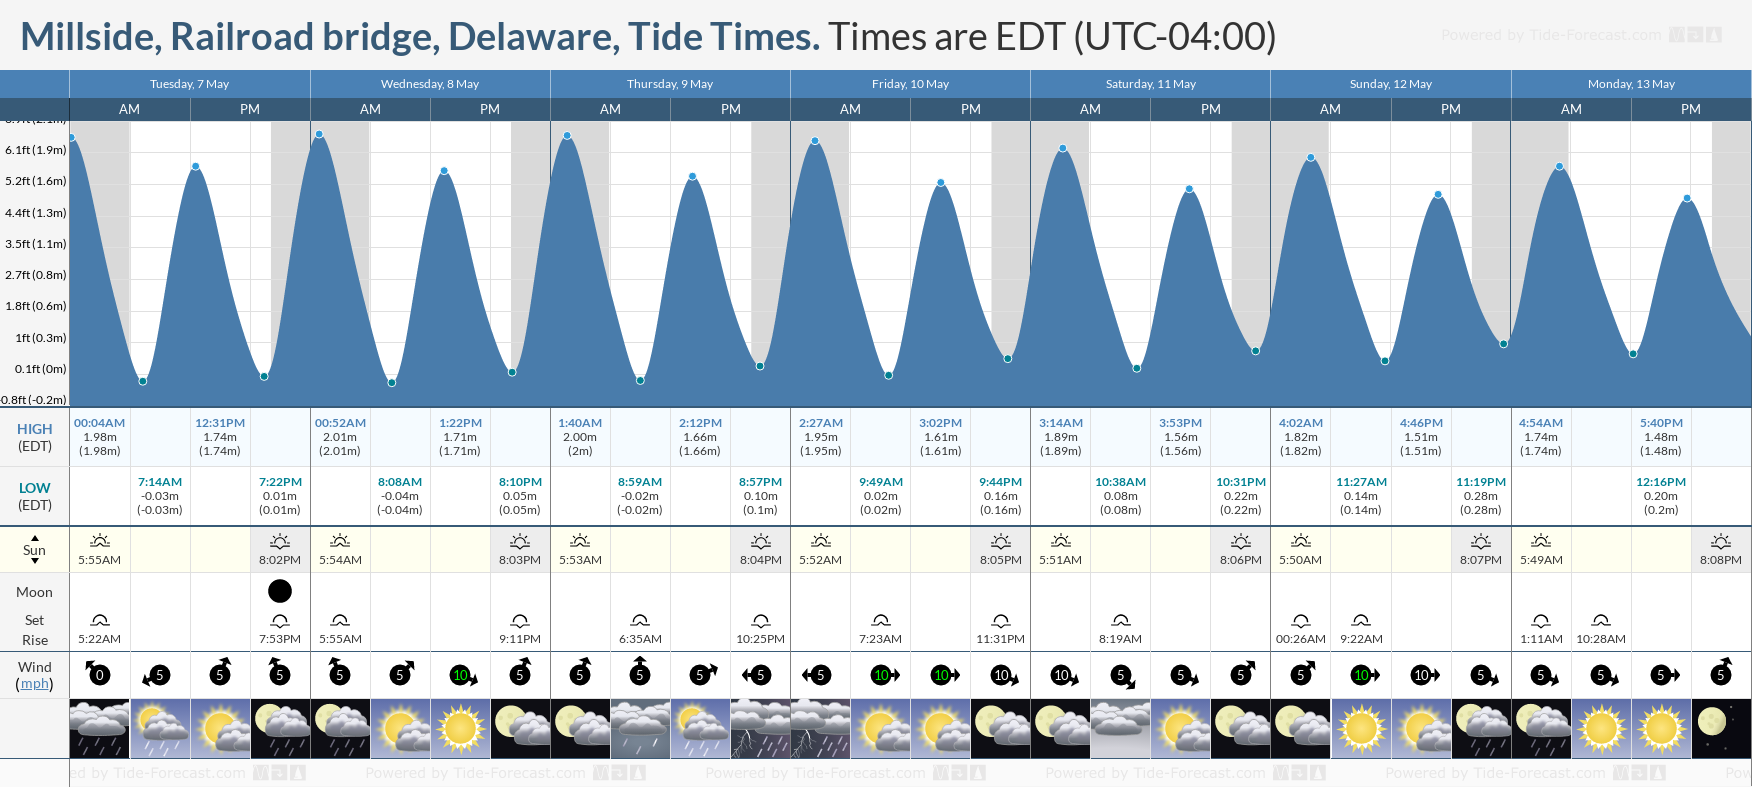 Millside, Railroad bridge, Delaware Tide Chart including high and low tide times for the next 7 days